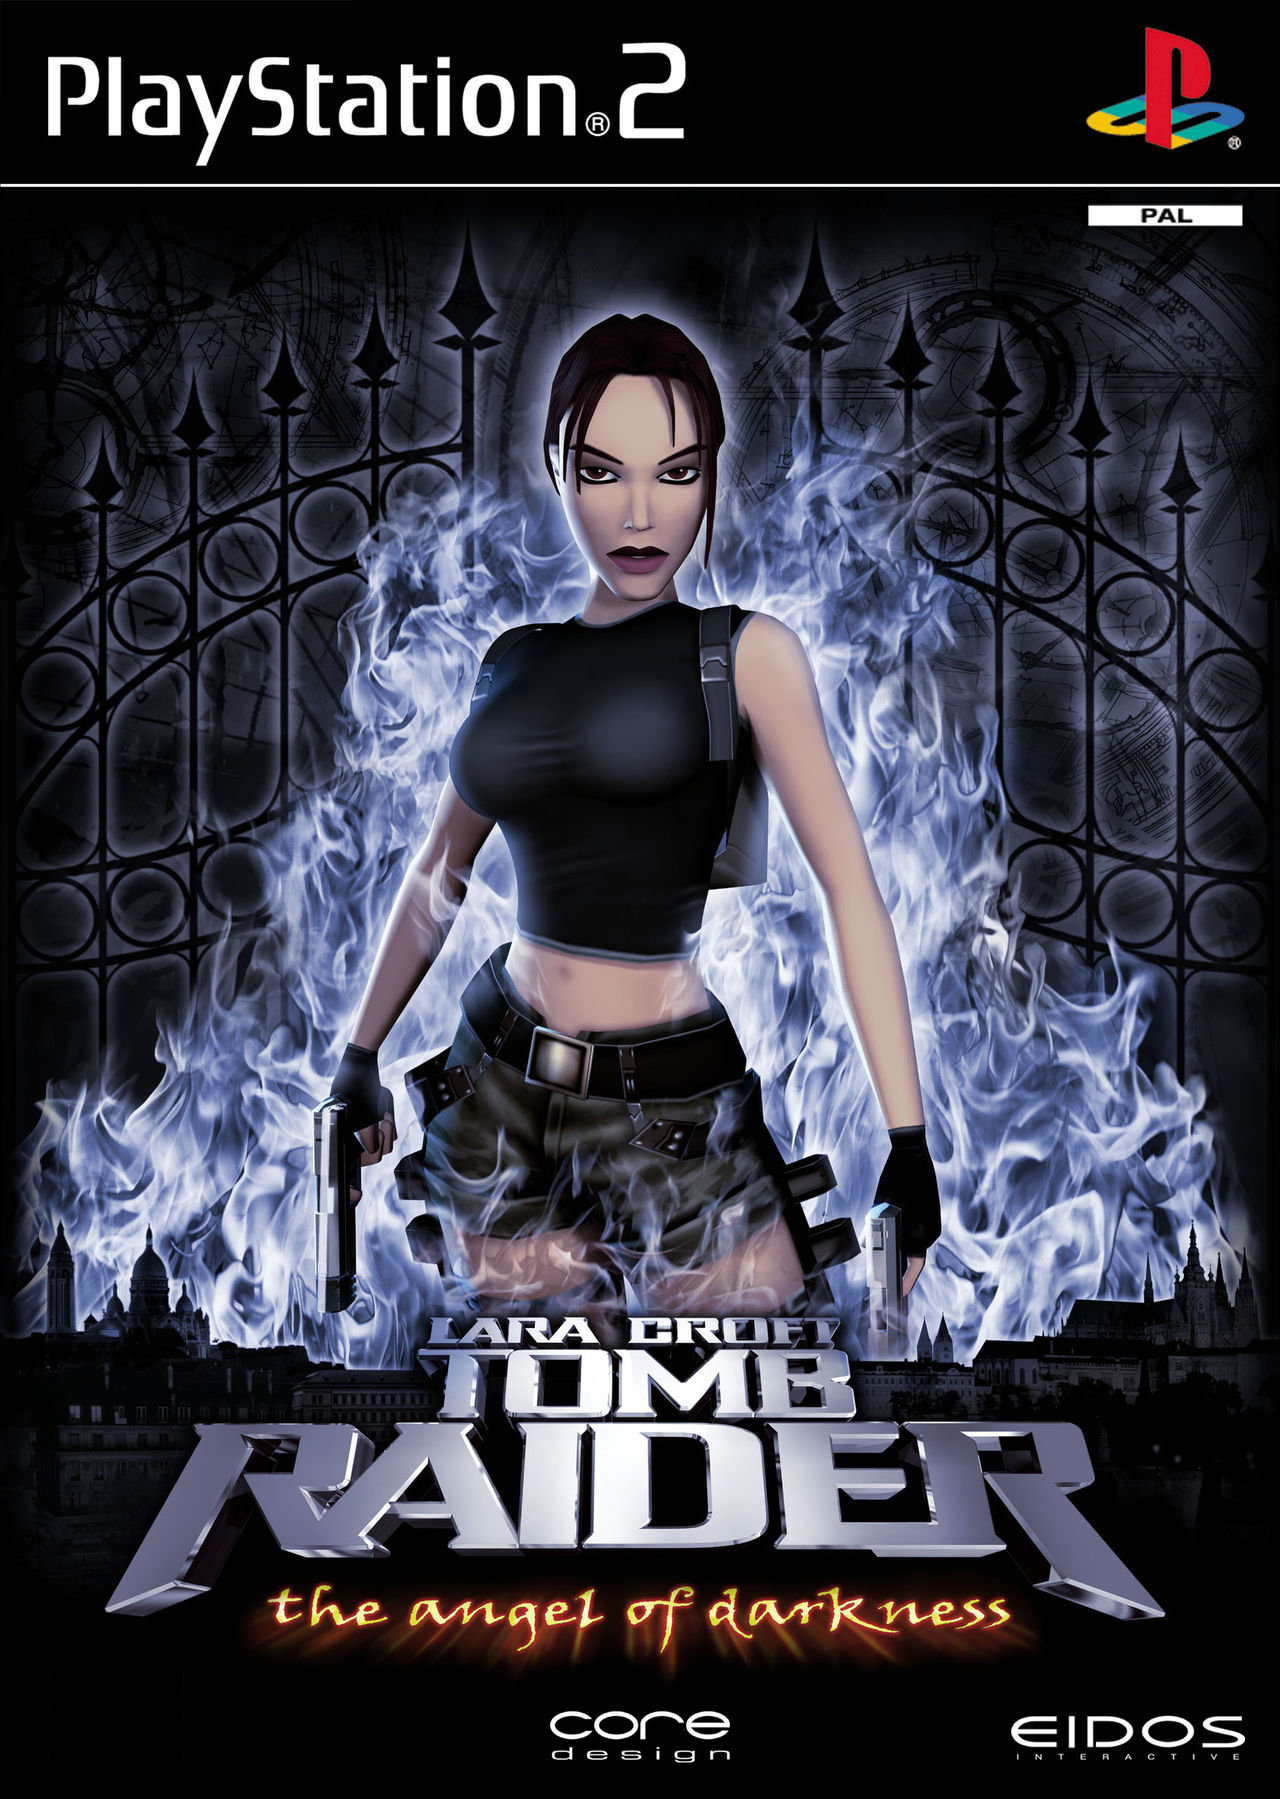 how to exit tomb raider 2 pc